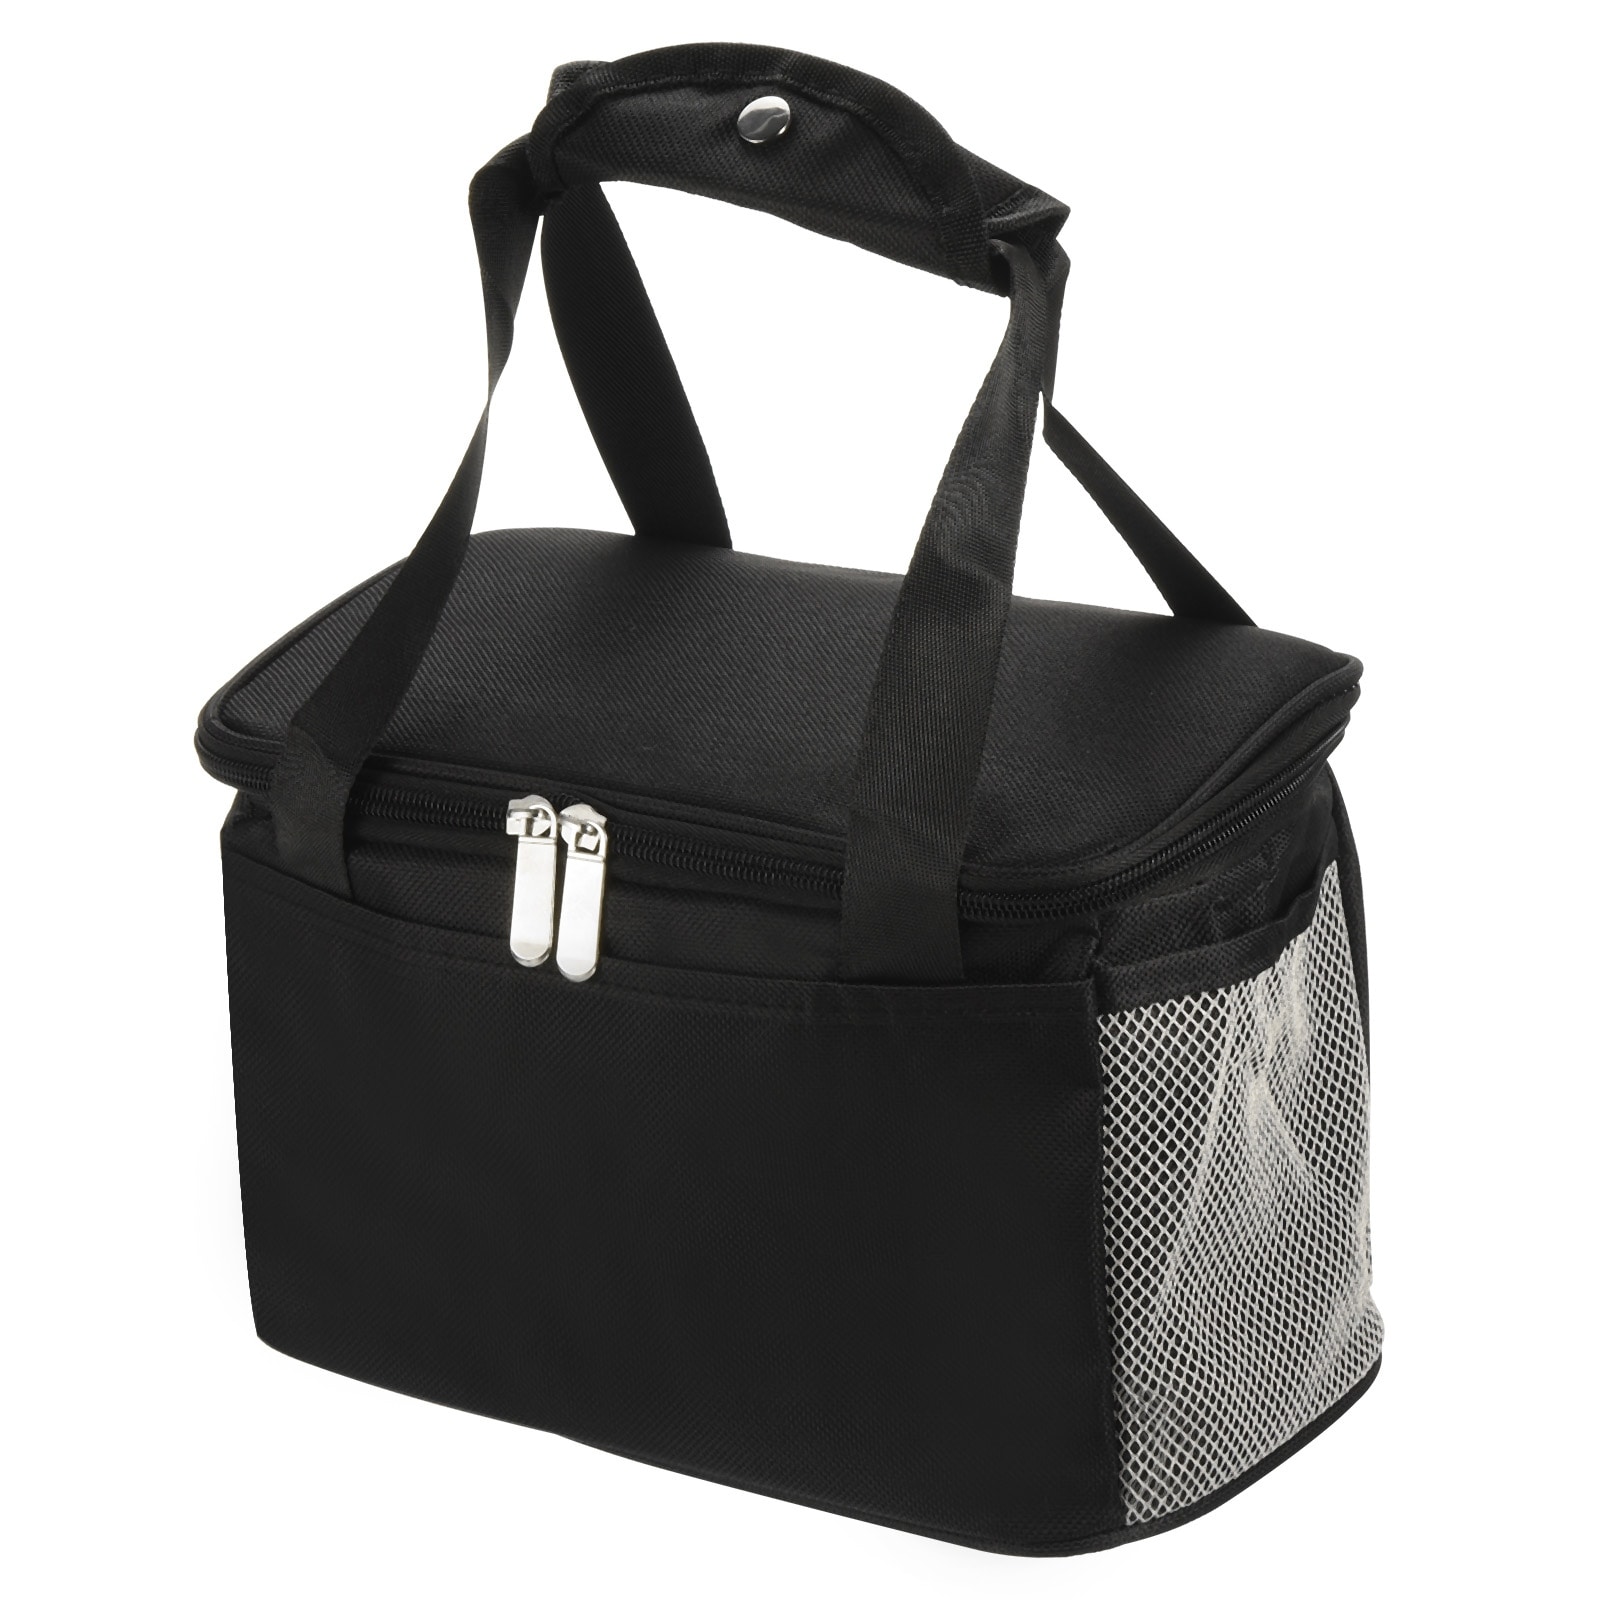 Lunch Box for Women/Men, Insulated Cooler Lunch Bag, 5.9x6.7x9.8 Inch